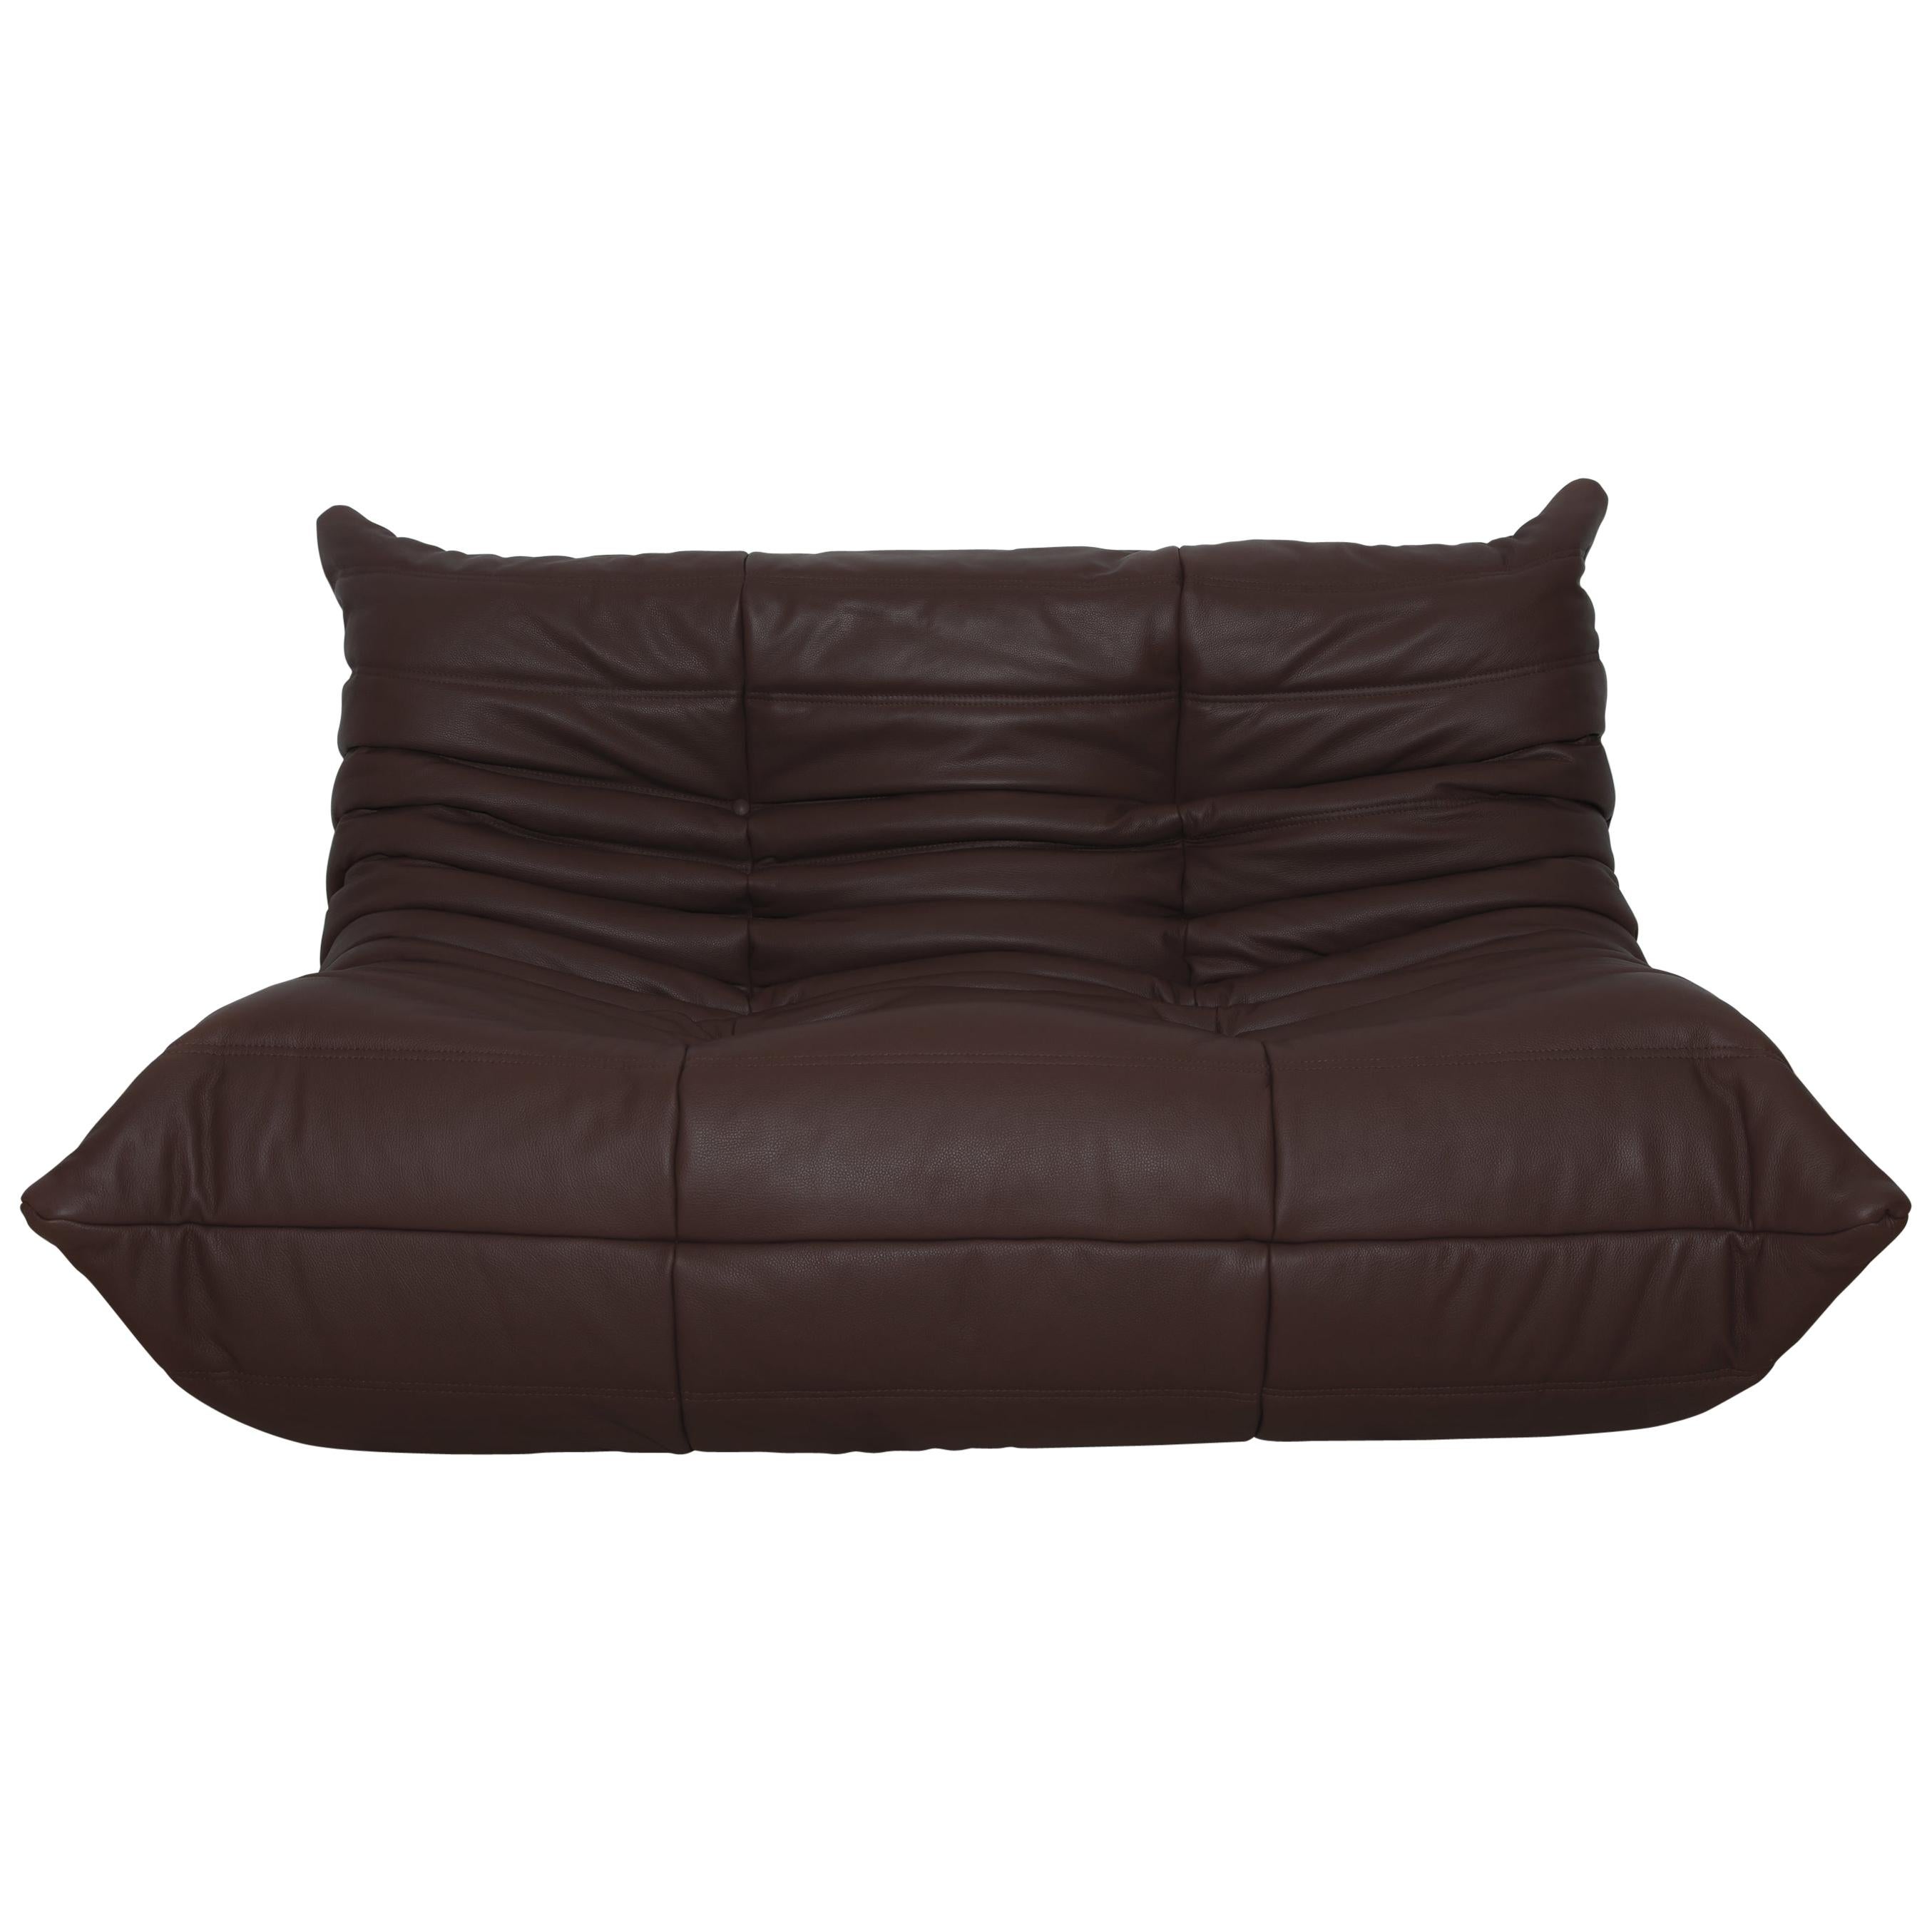 Togo 2-Seat Sofa in Madras Brown Leather by Michel Ducaroy for Ligne Roset For Sale